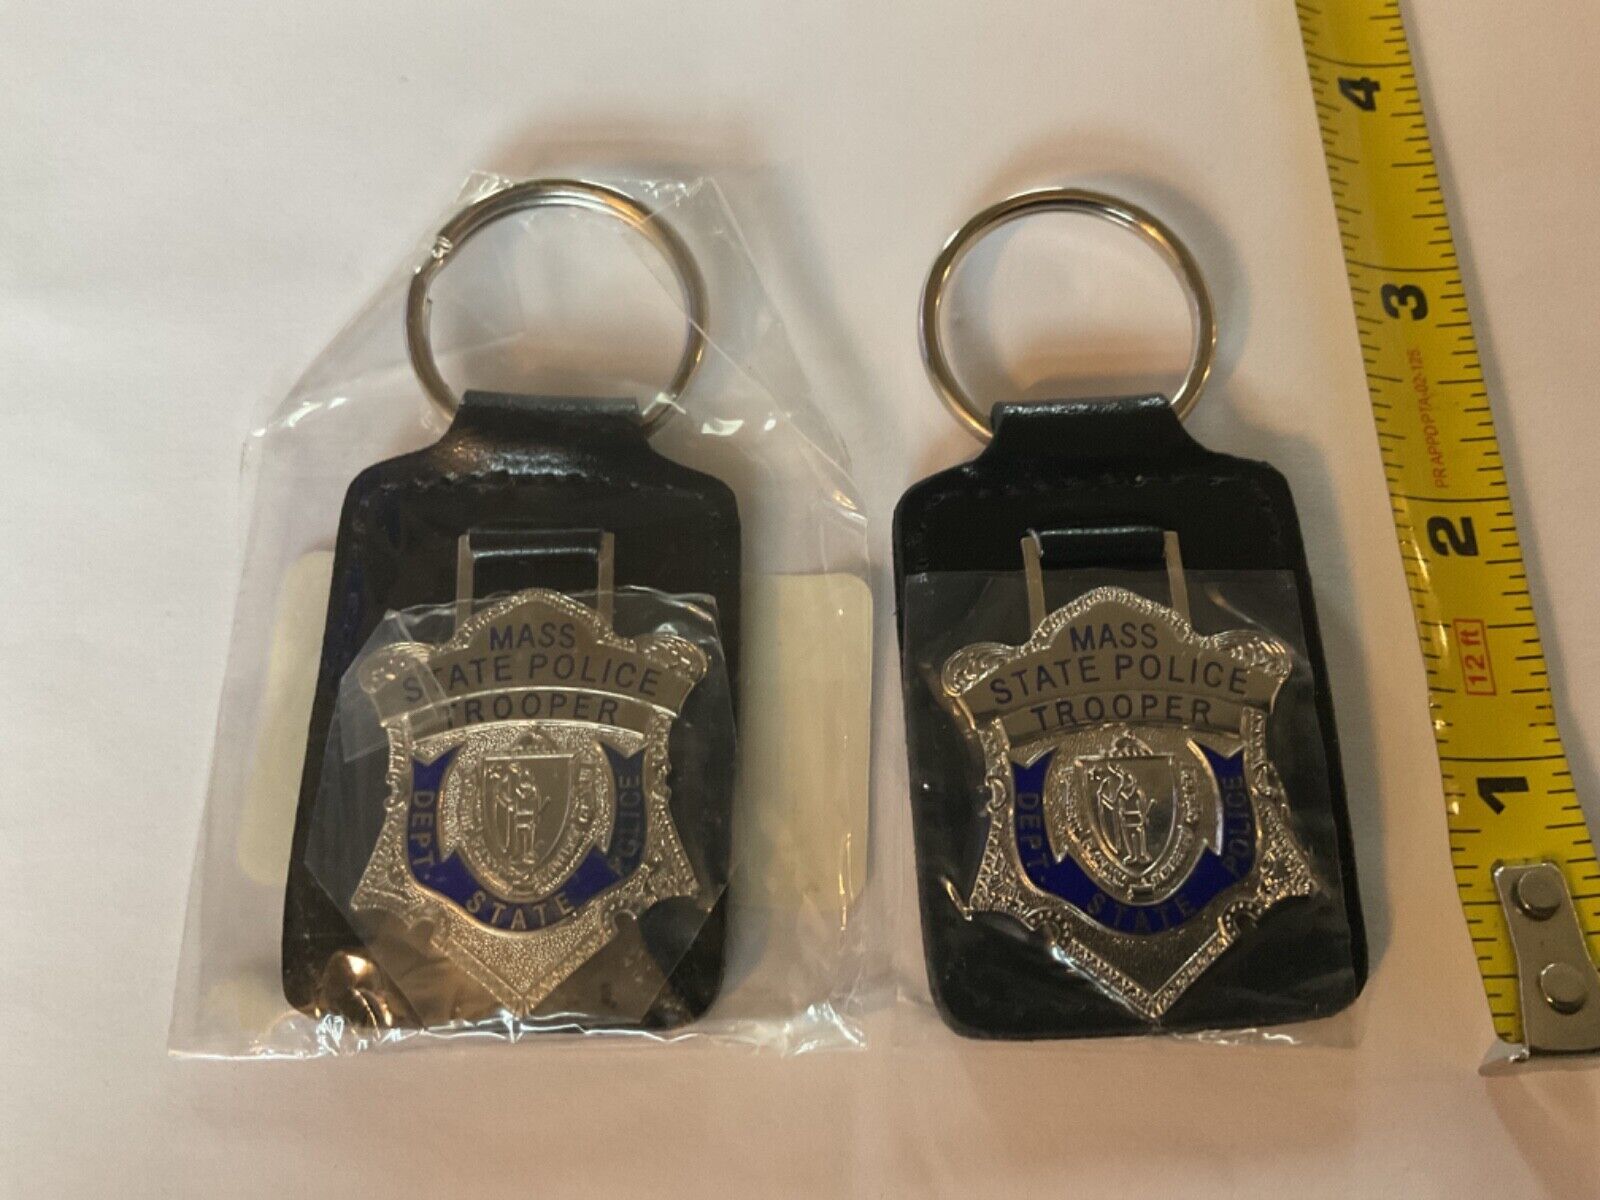 Massachusetts State Police Metal badge collectable key chain.